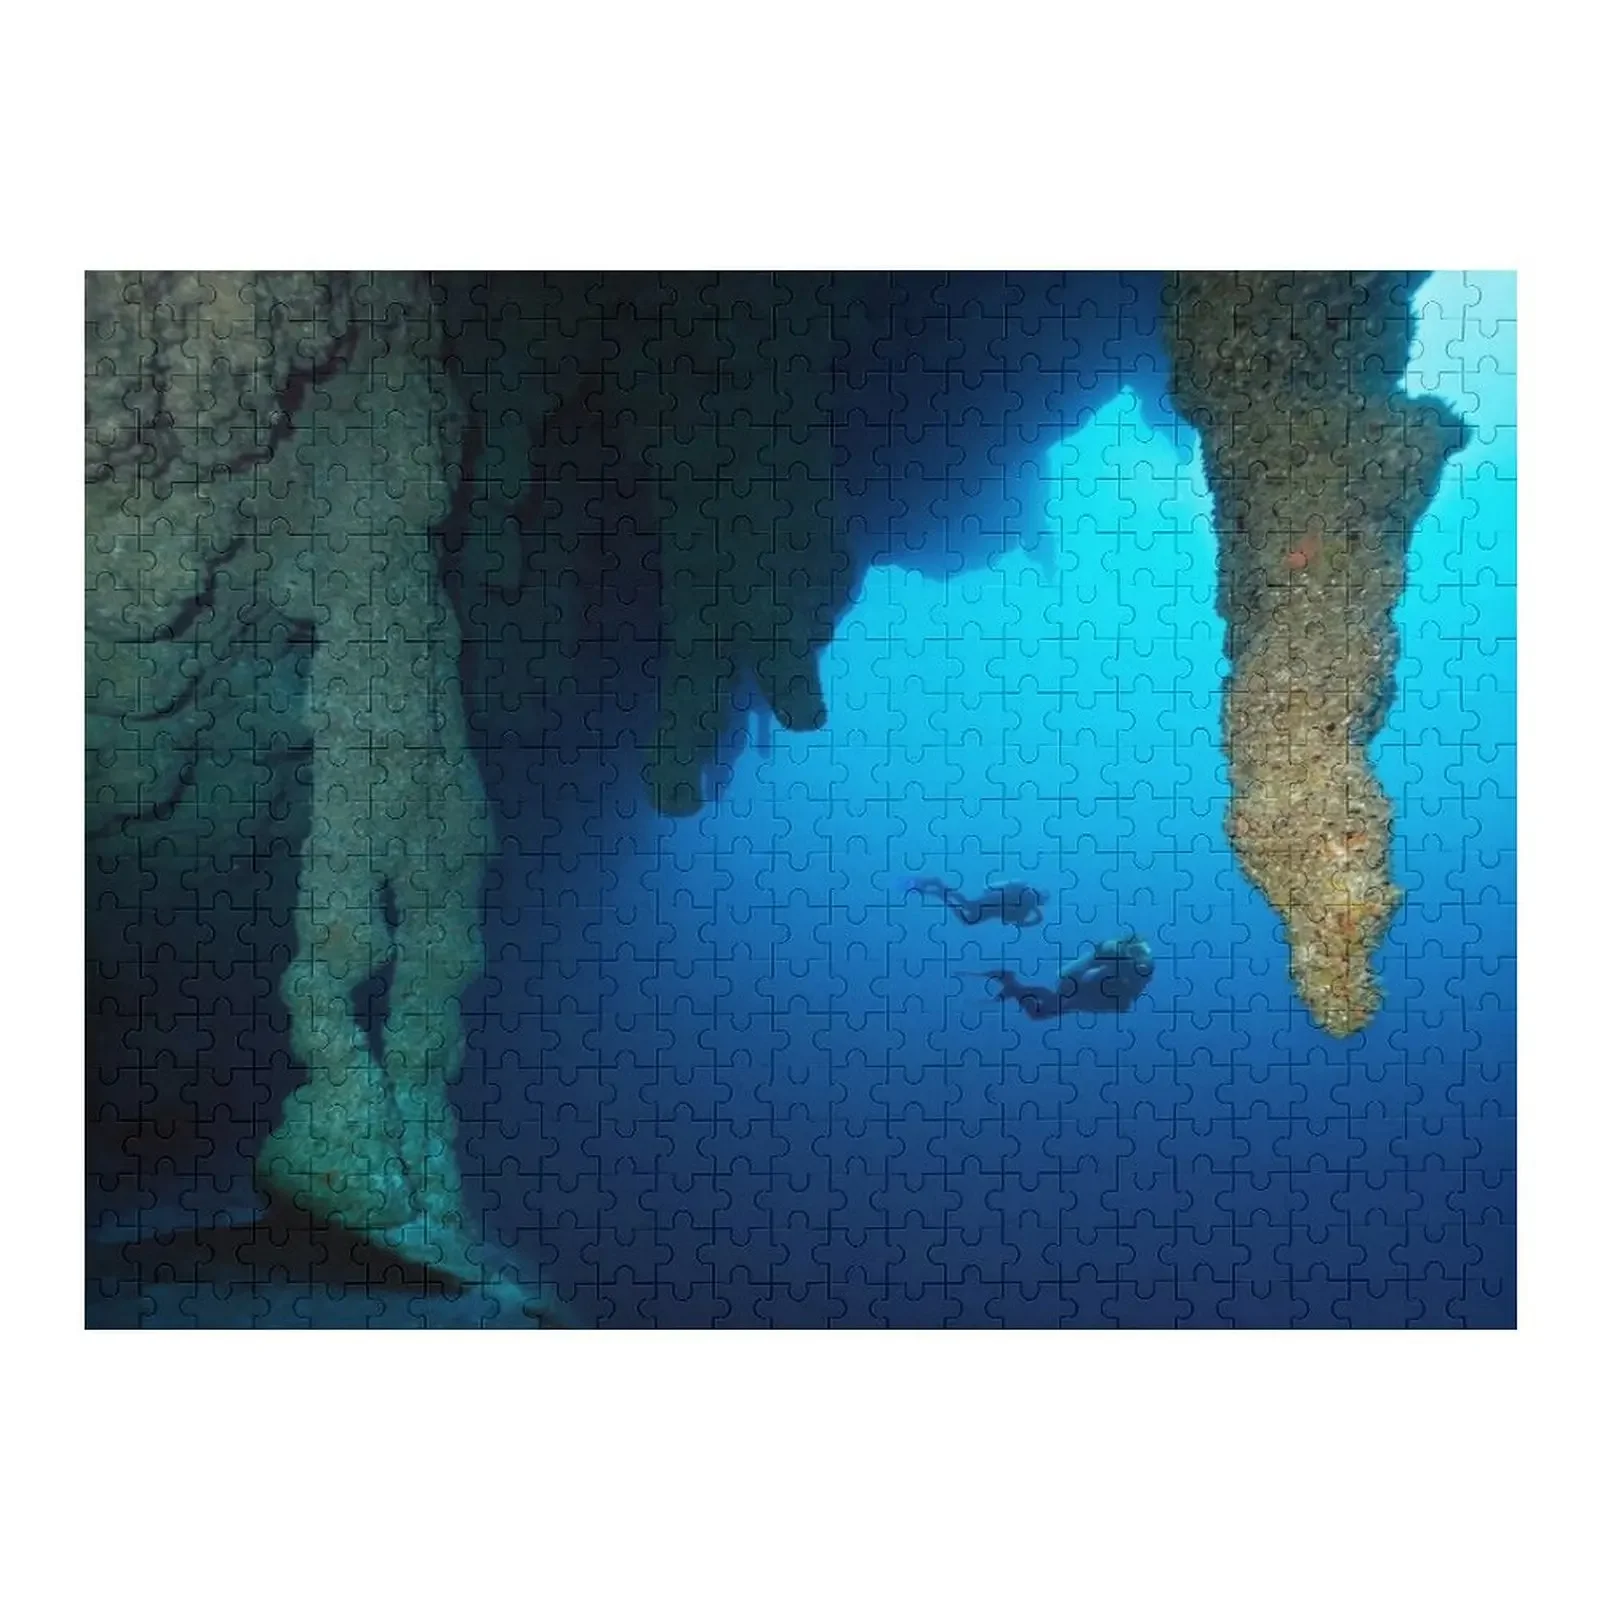 

Blue Hole Belize Jigsaw Puzzle Adult Wooden Puzze Custom Child Gift Custom Jigsaw Customized Picture Works Of Art Puzzle